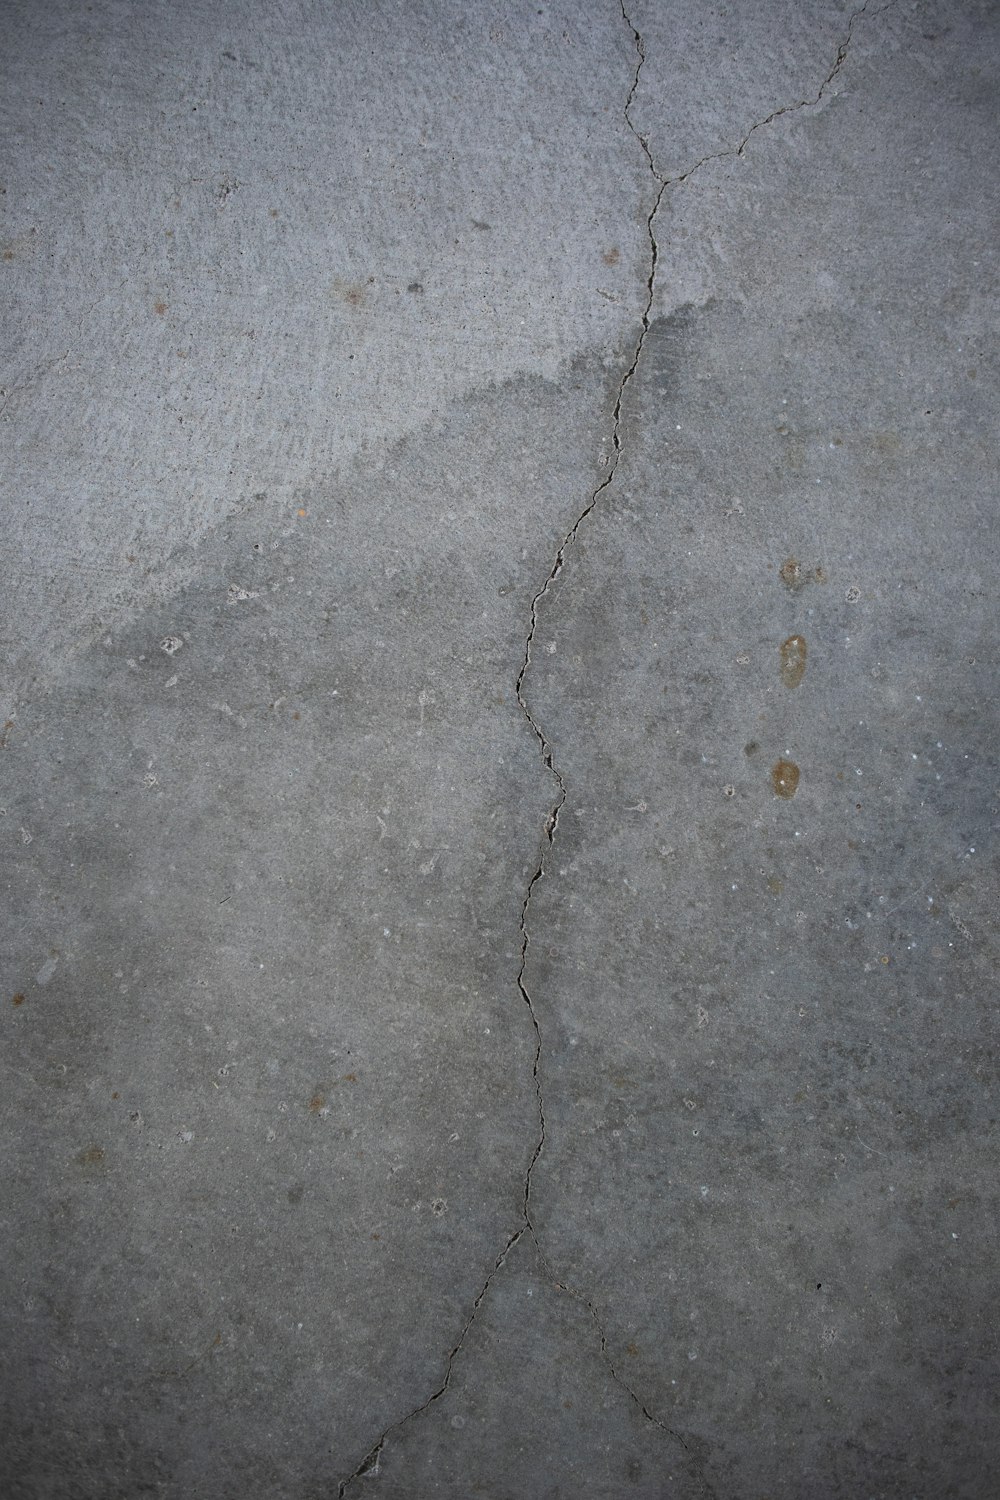 a crack in the concrete with a red fire hydrant